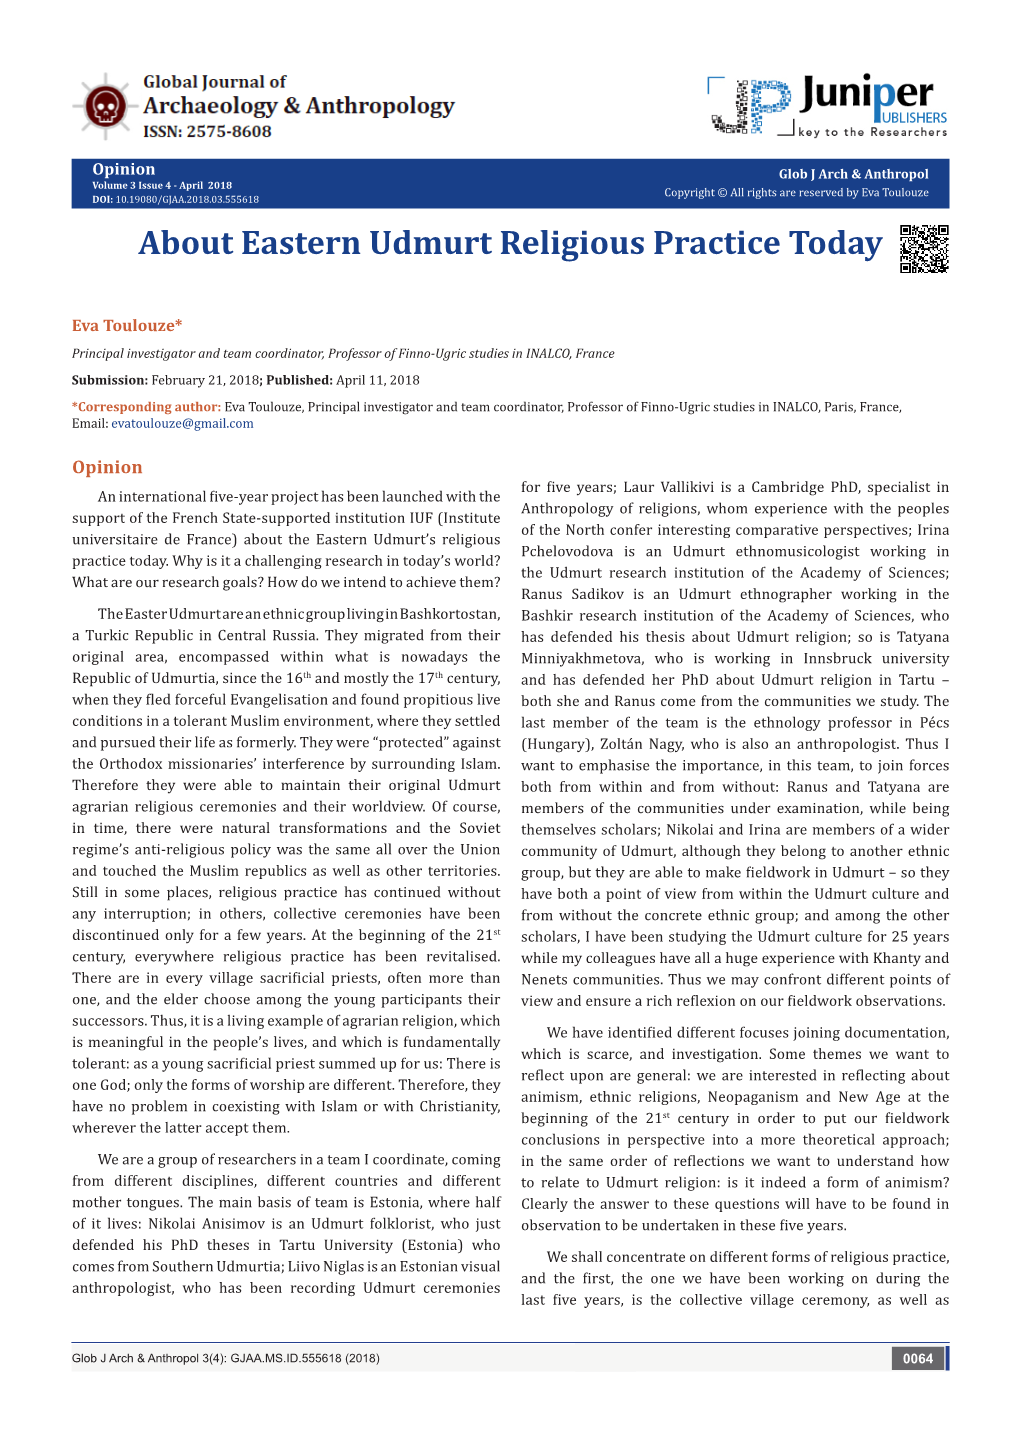 About Eastern Udmurt Religious Practice Today